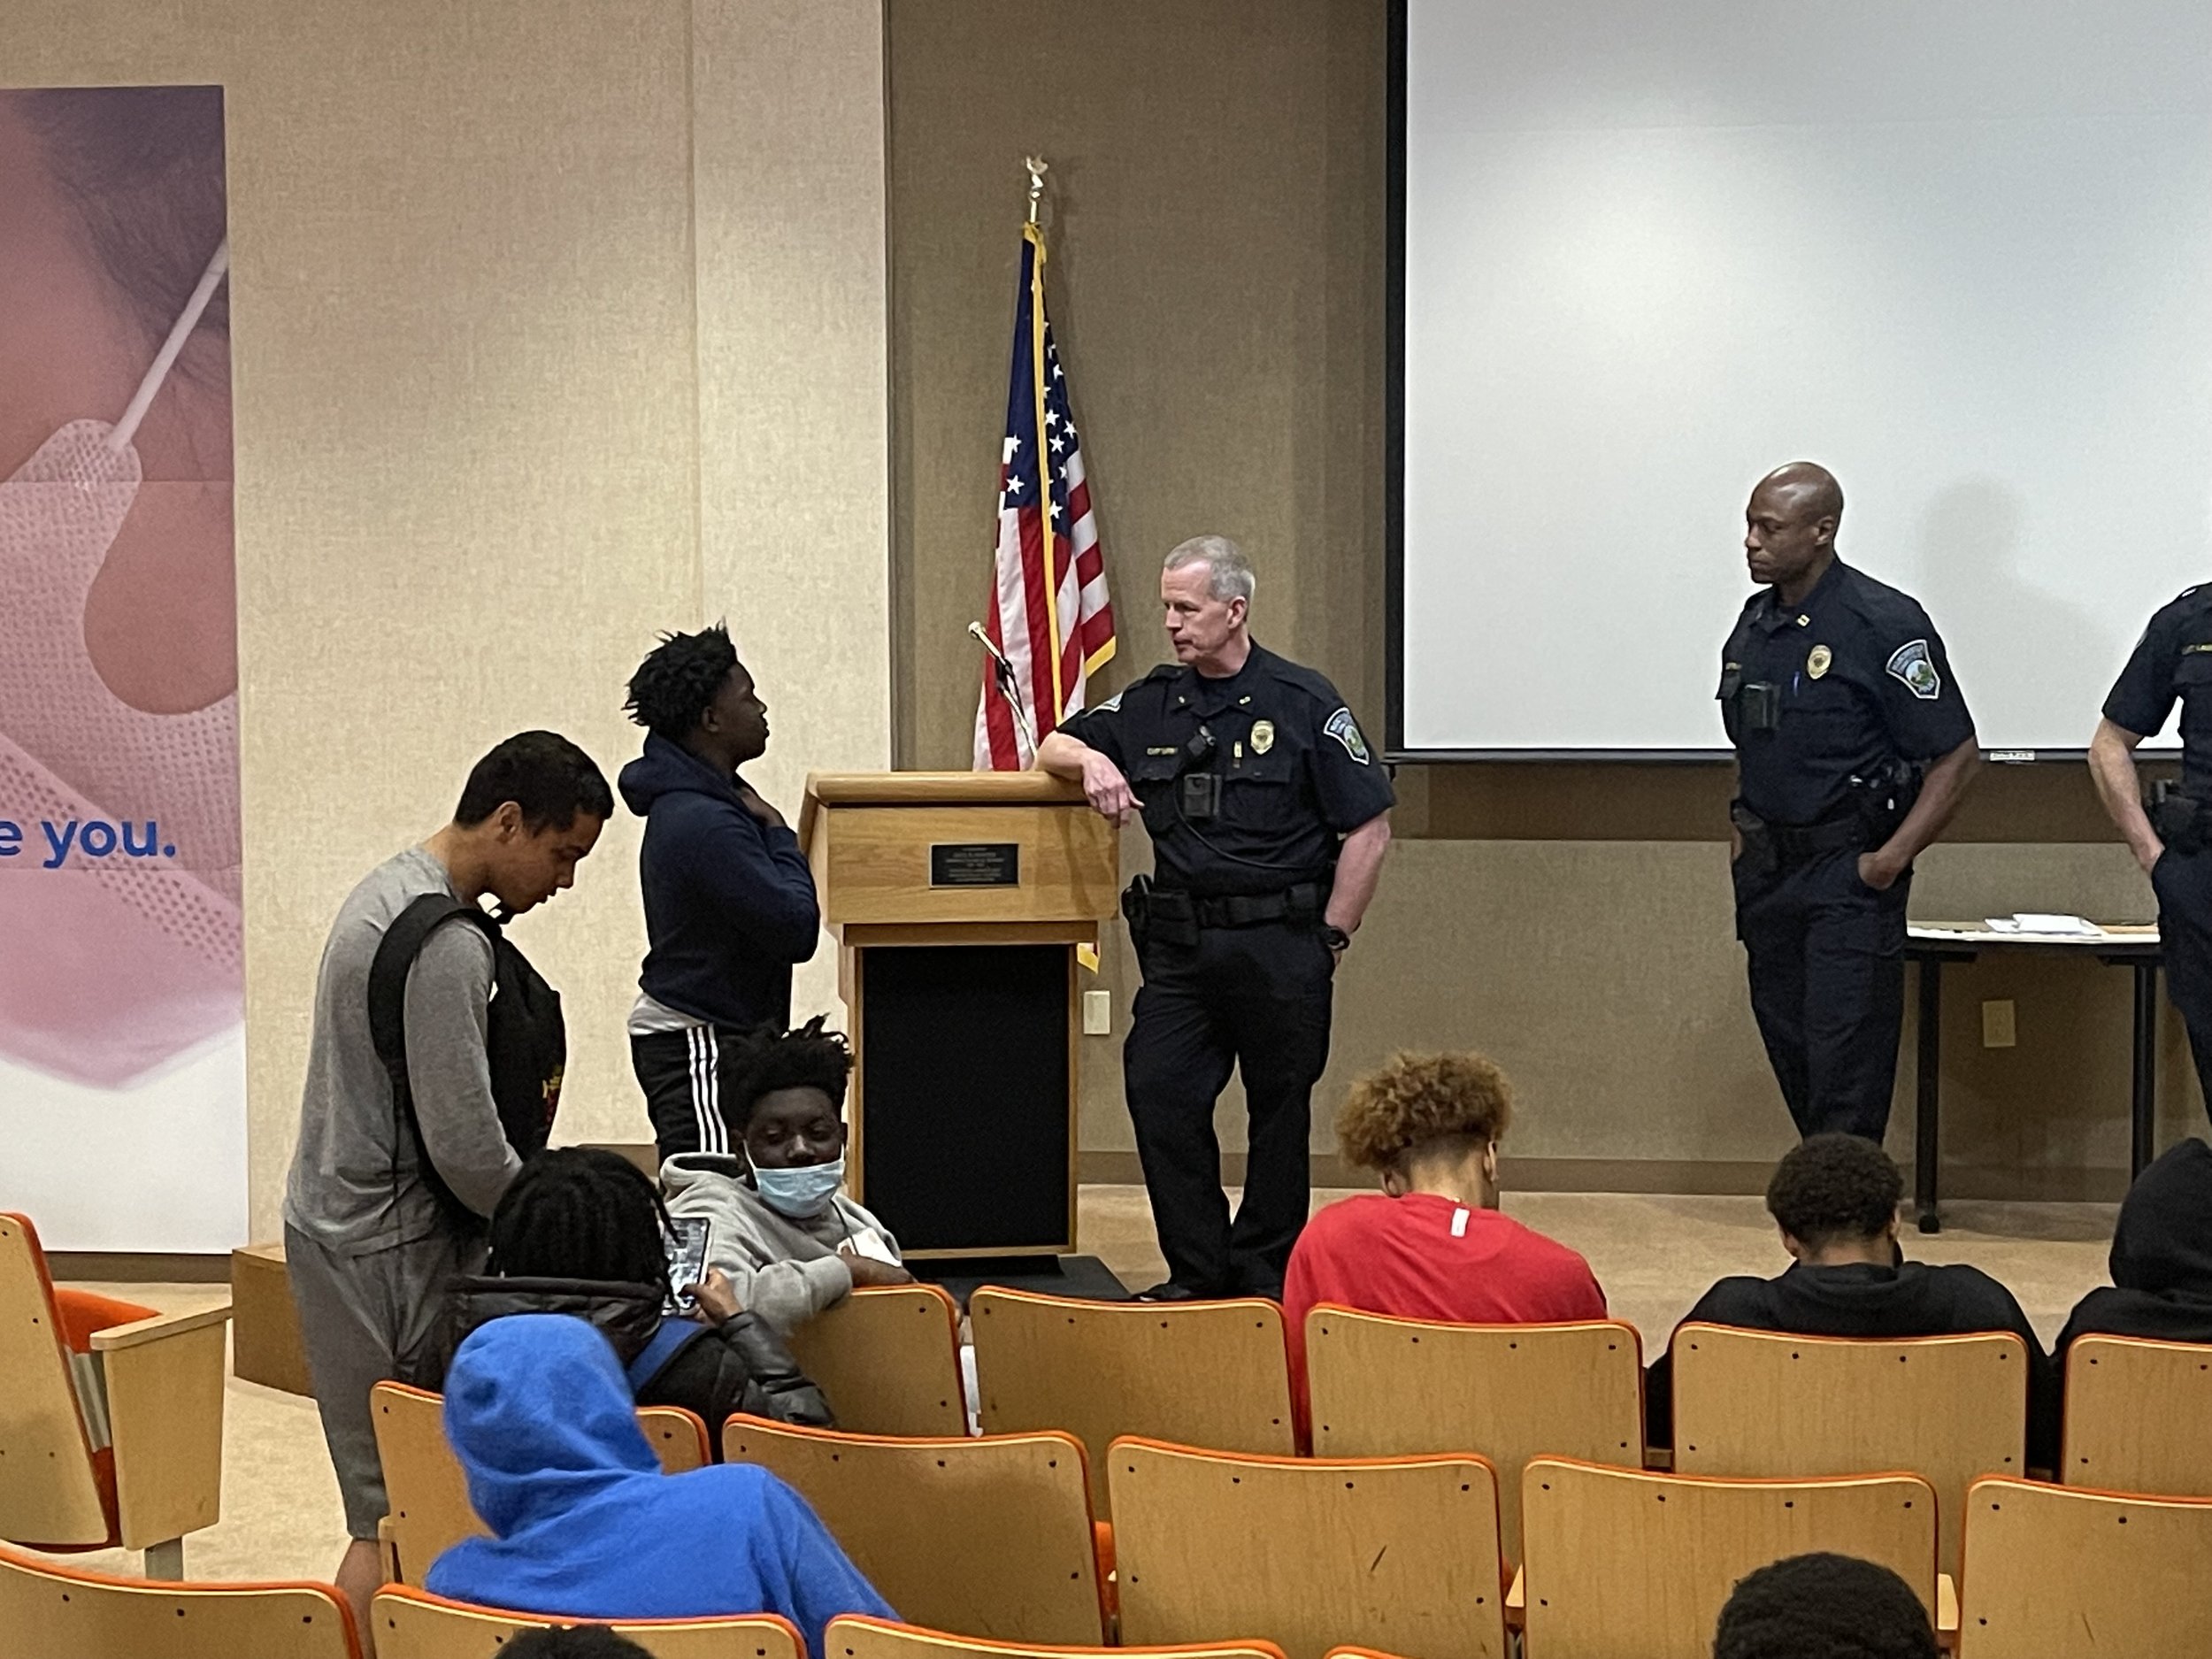 Police officers educating young men